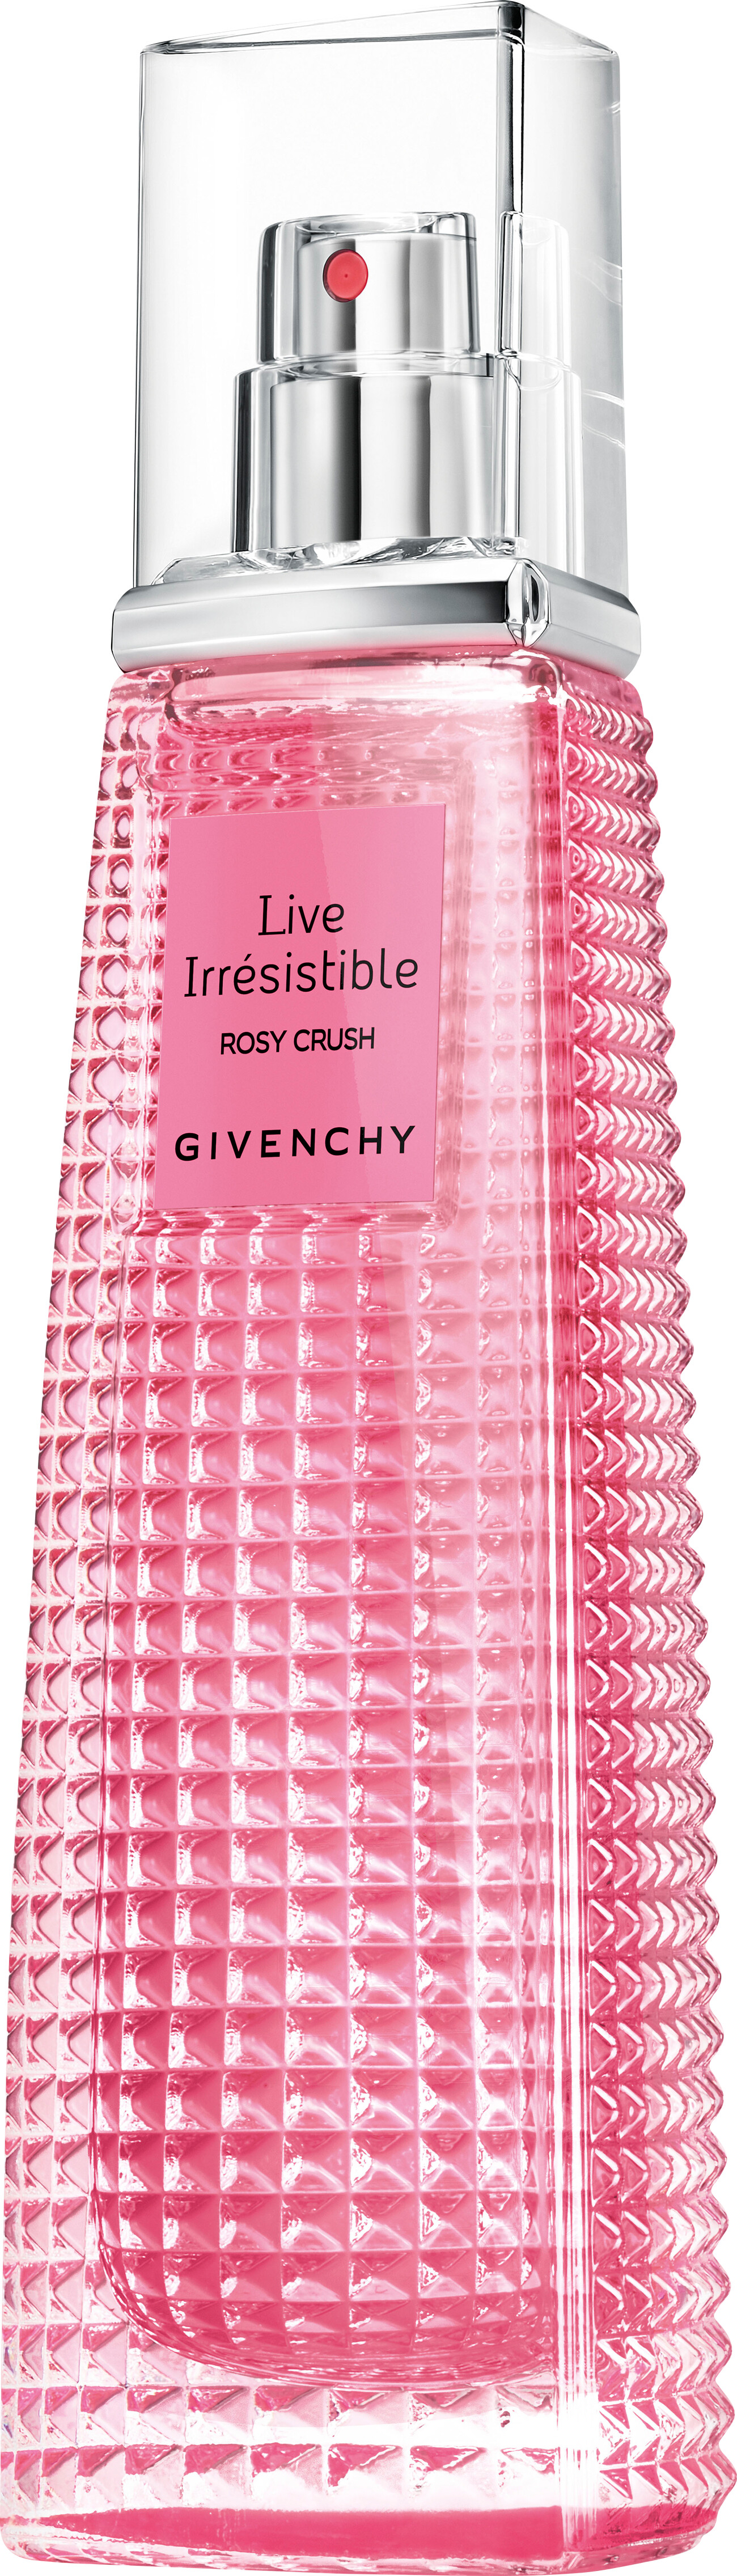 rosy crush live irresistible